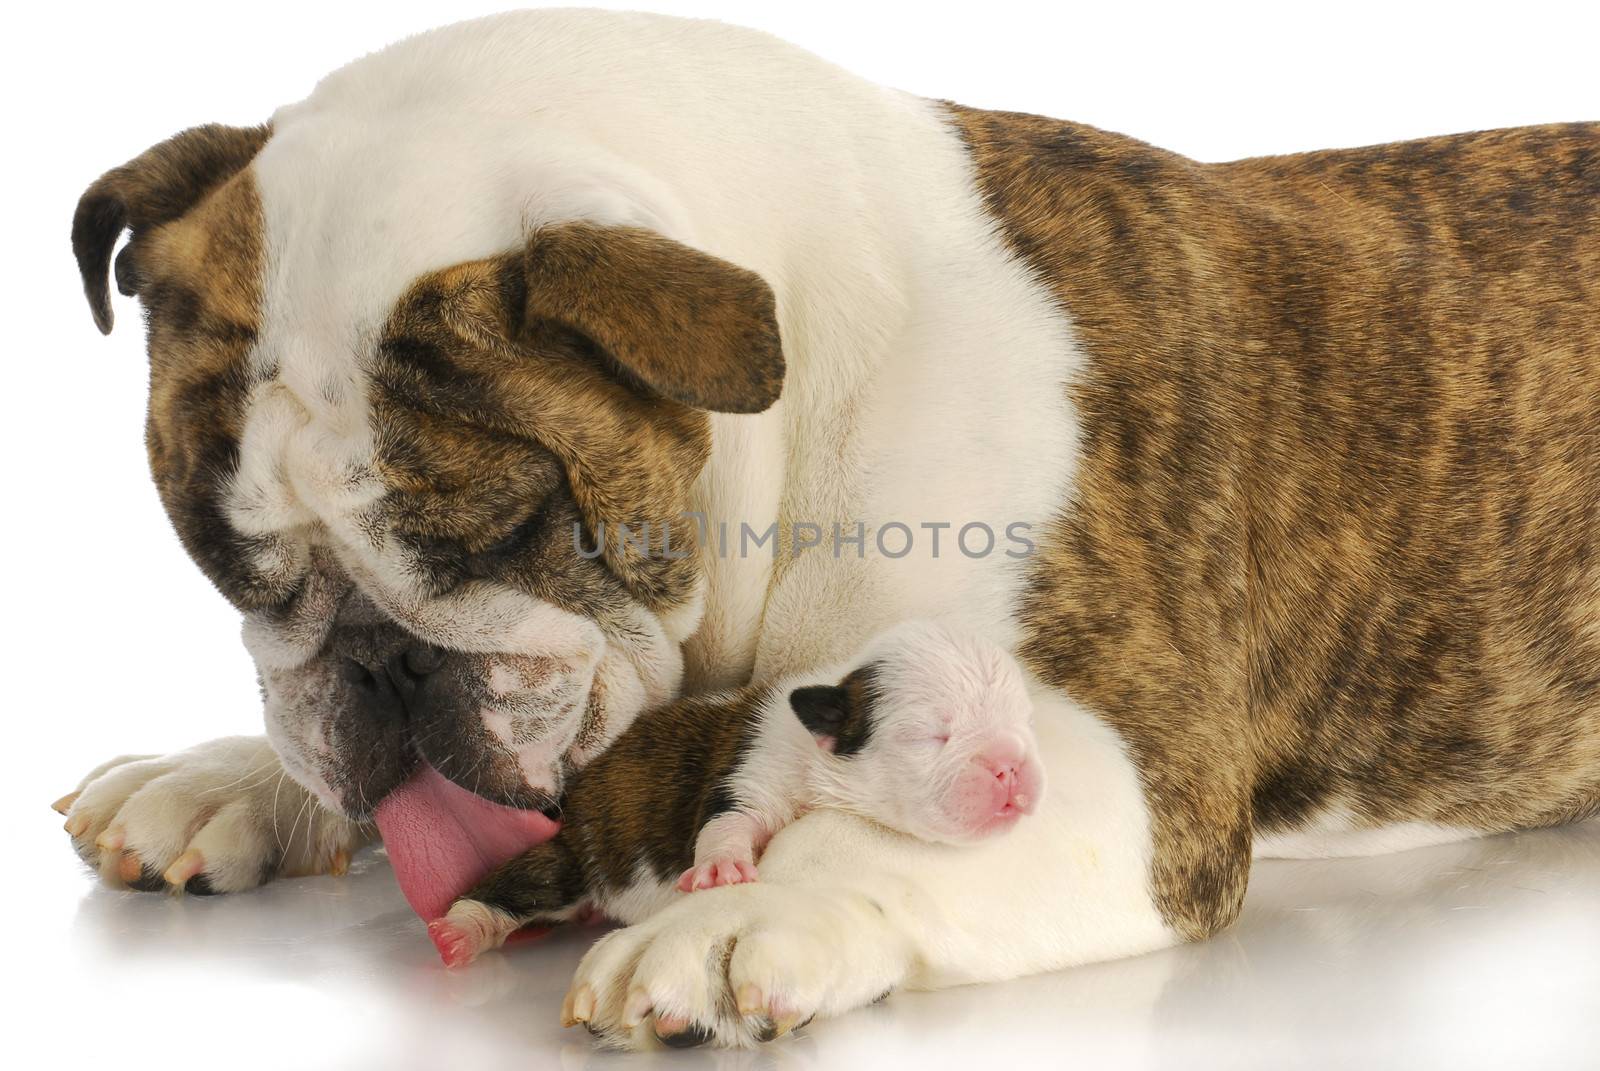 newborn puppy being cleaned by mother - english bulldog and two week old pup